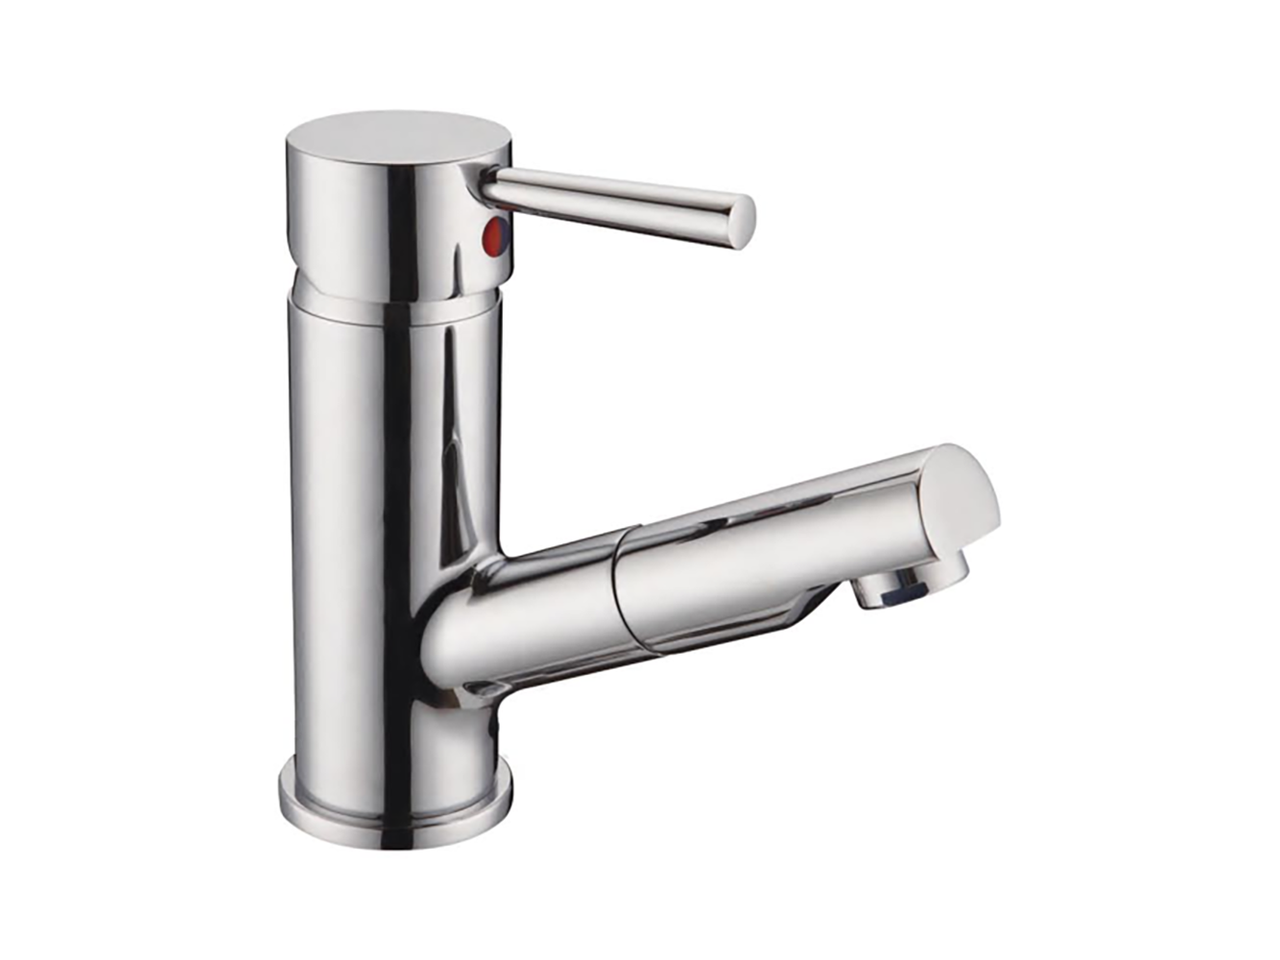 HUBERS.L. washbasin mixer with pull-out handspray TRATTO EVO